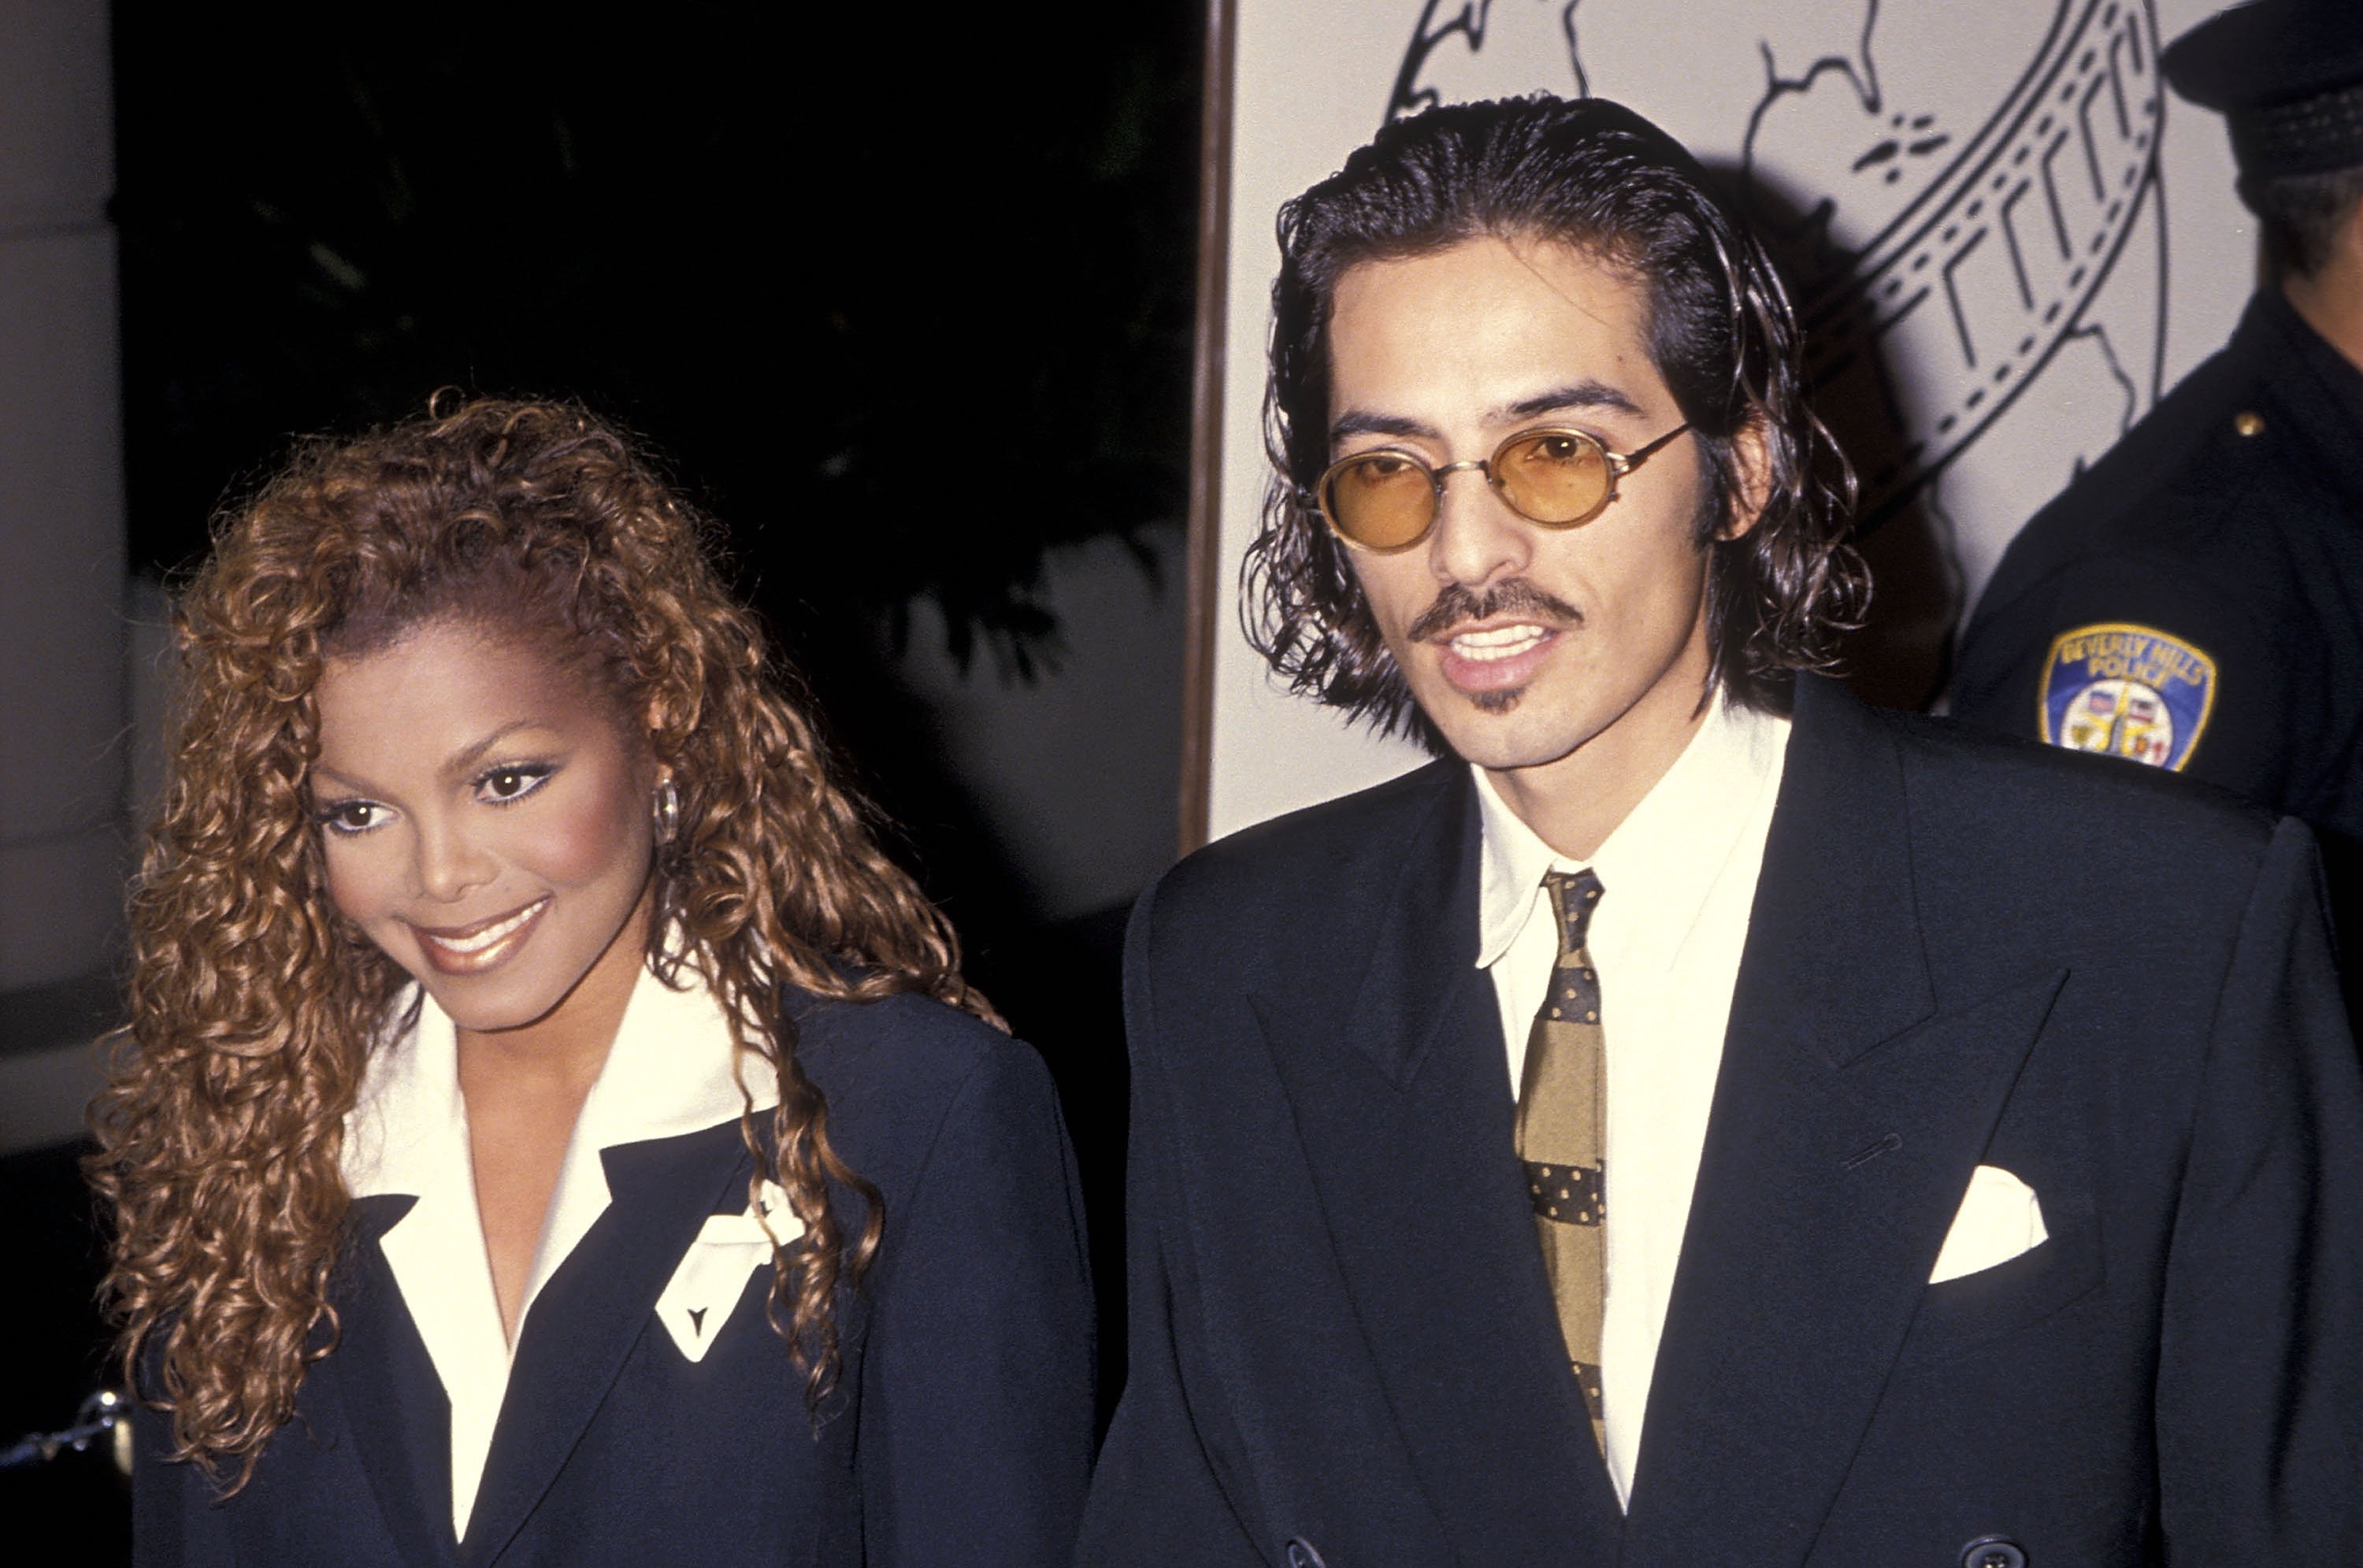 Janet Jackson and Rene Elizondo on January 22, 1994, at Beverly Hilton Hotel in Beverly Hills, California. | Source: Getty Images